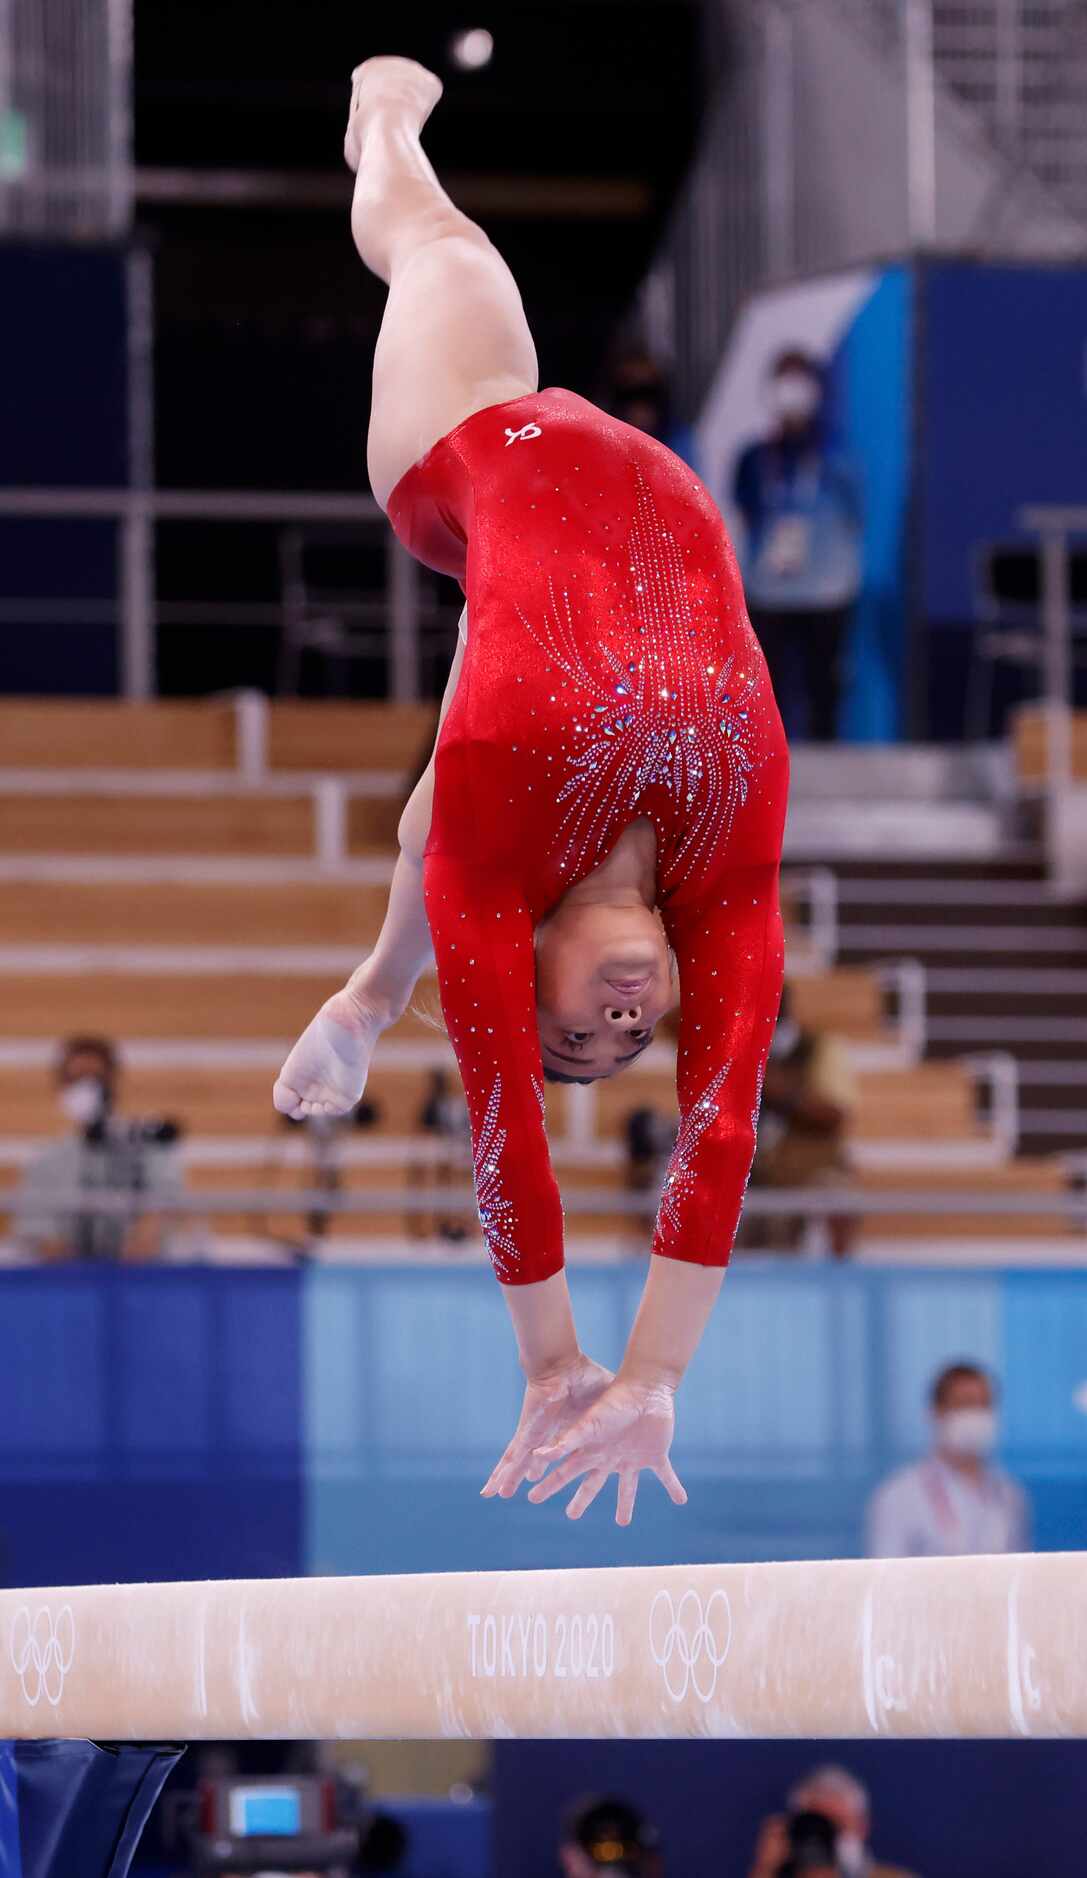 USA’s Sunisa Lee competes in the women’s balance beam final at the postponed 2020 Tokyo...